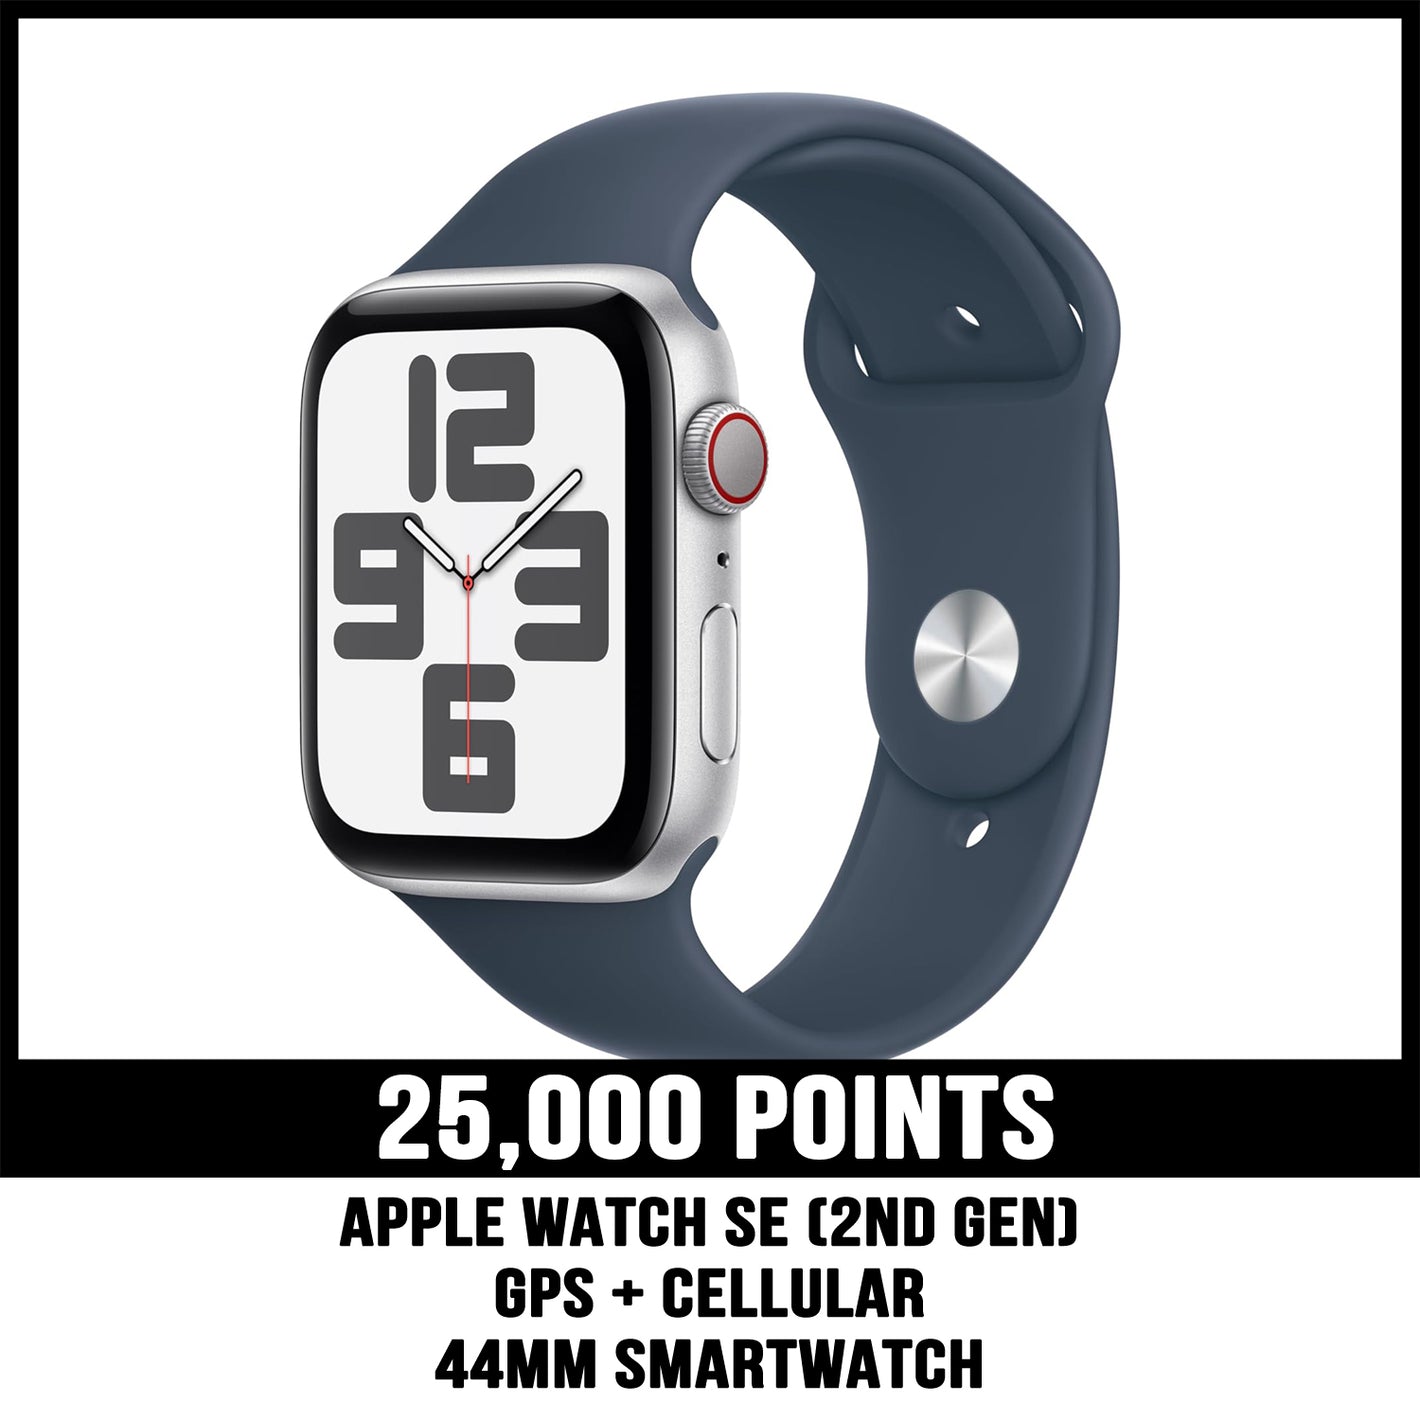 Apple Watch SE second generation prize for 25000 points